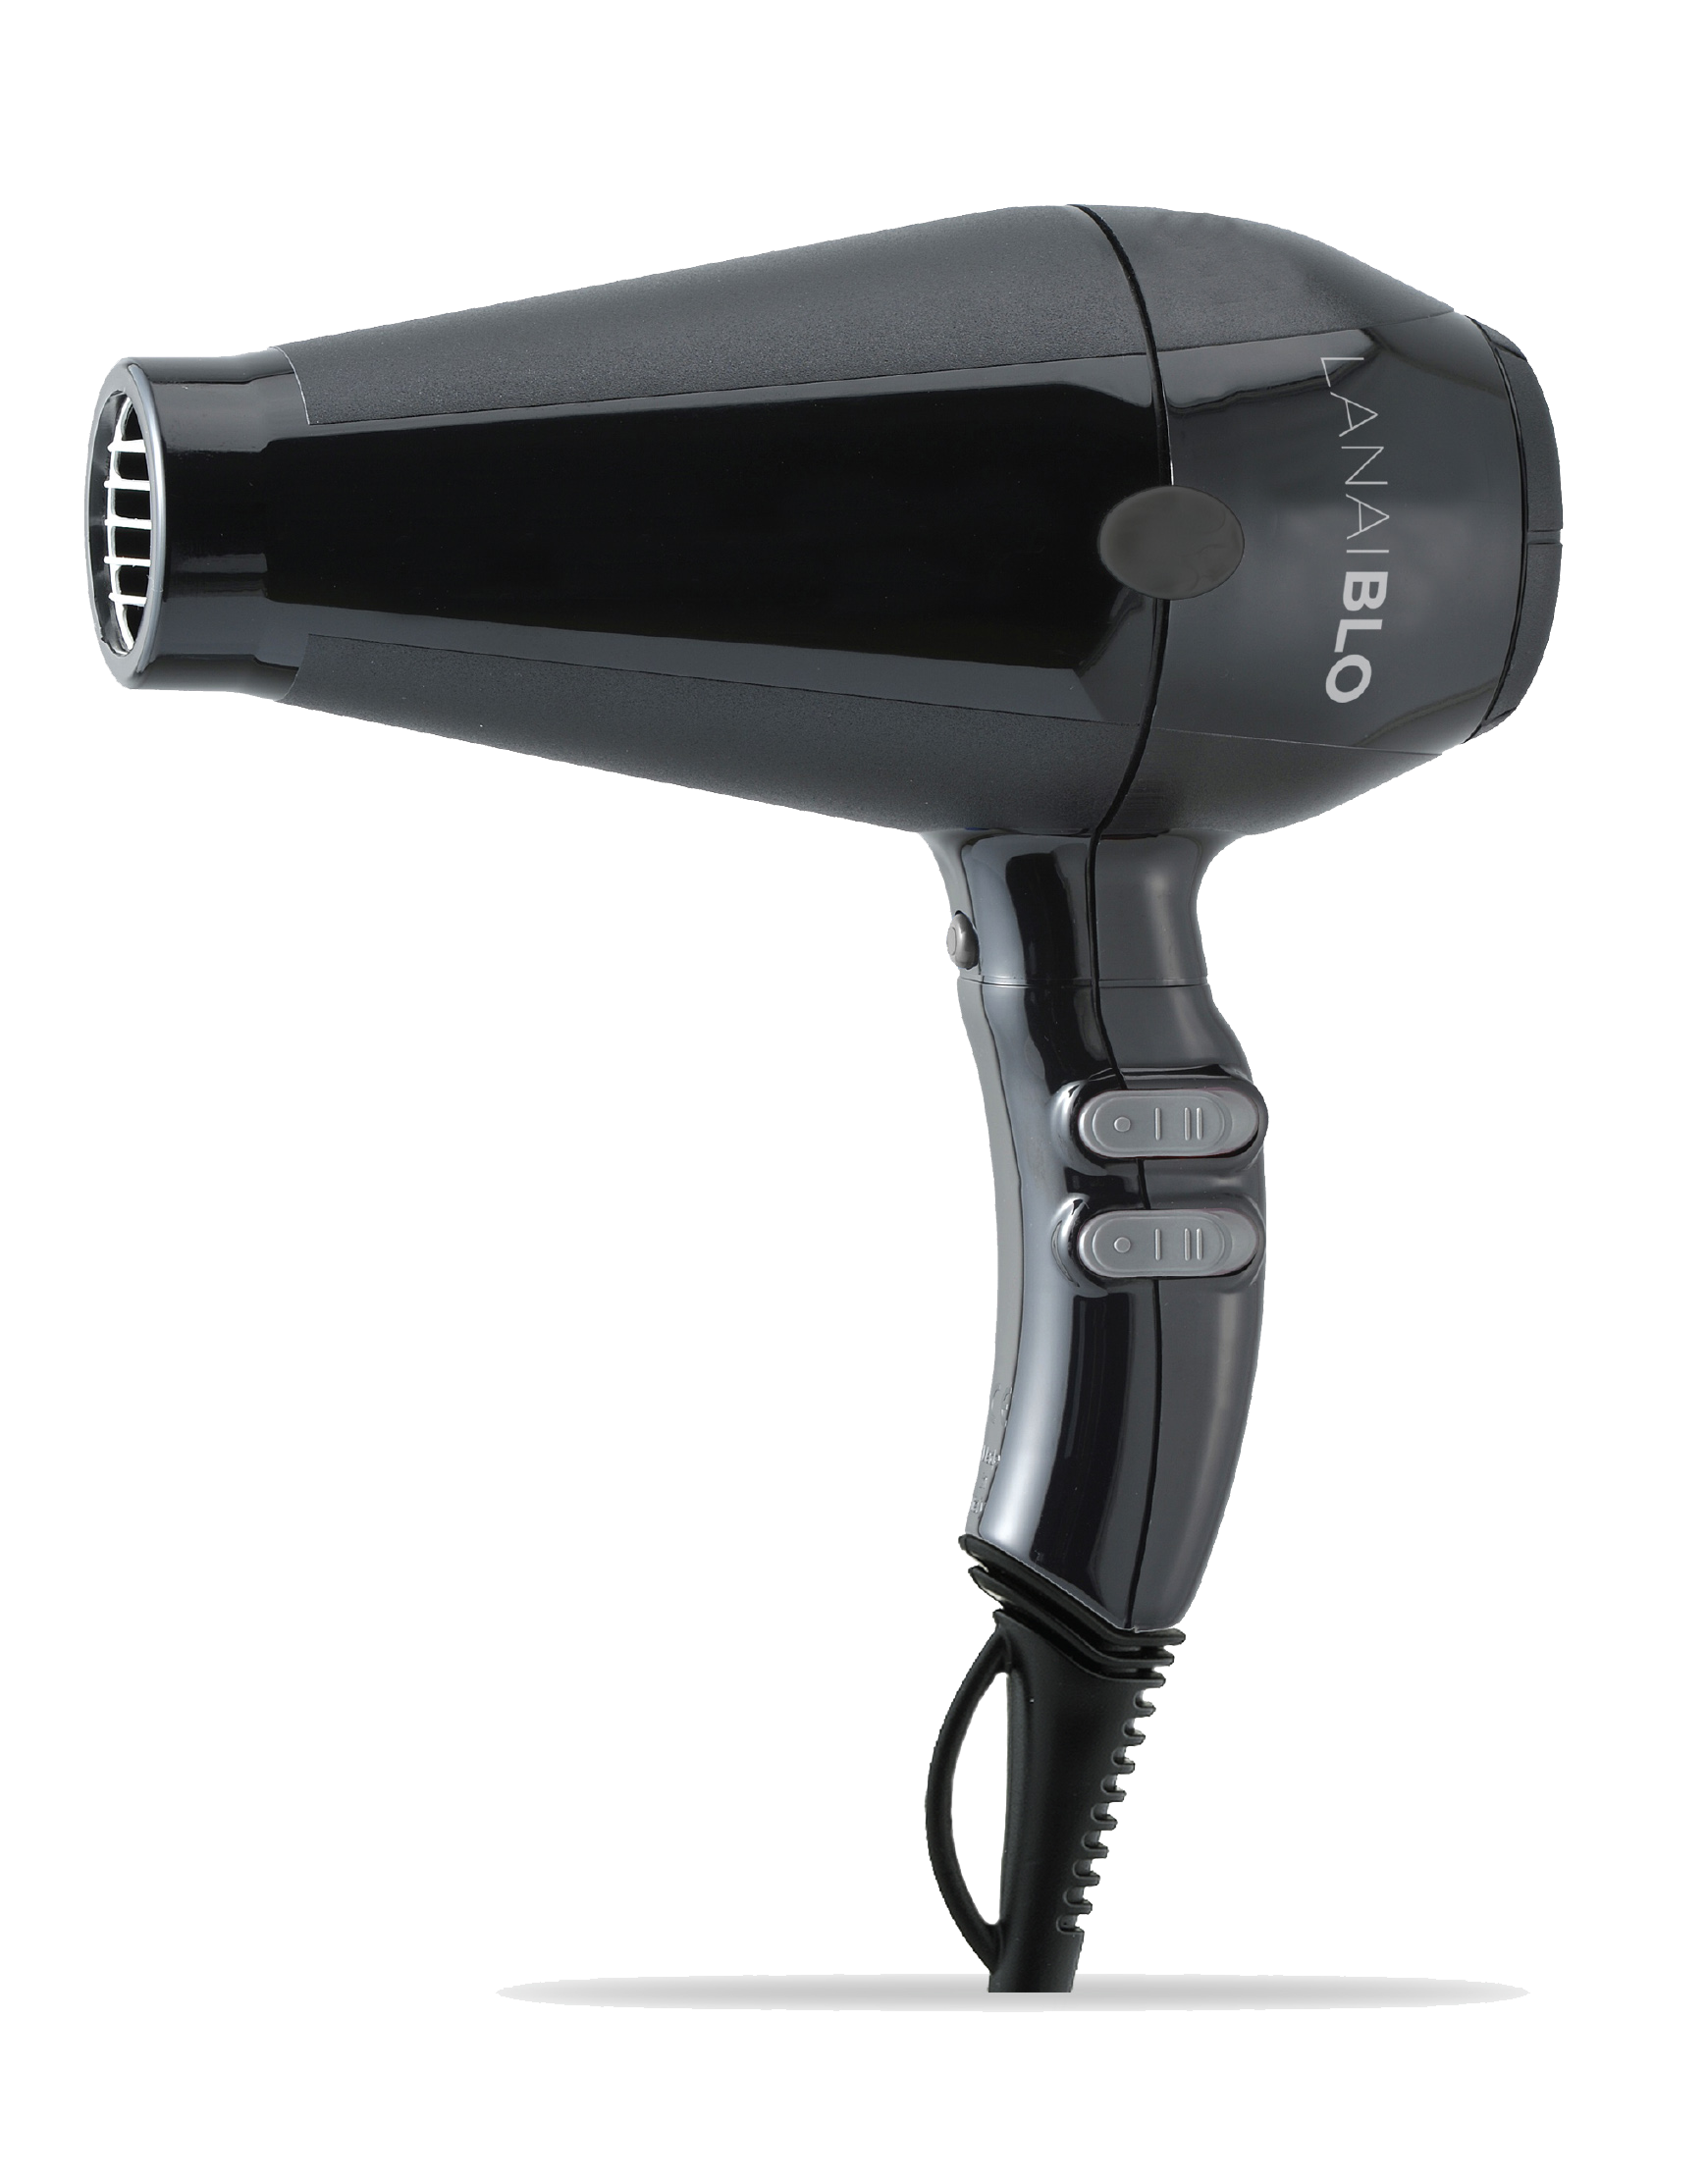 Hairdryer PNG High-Quality Image